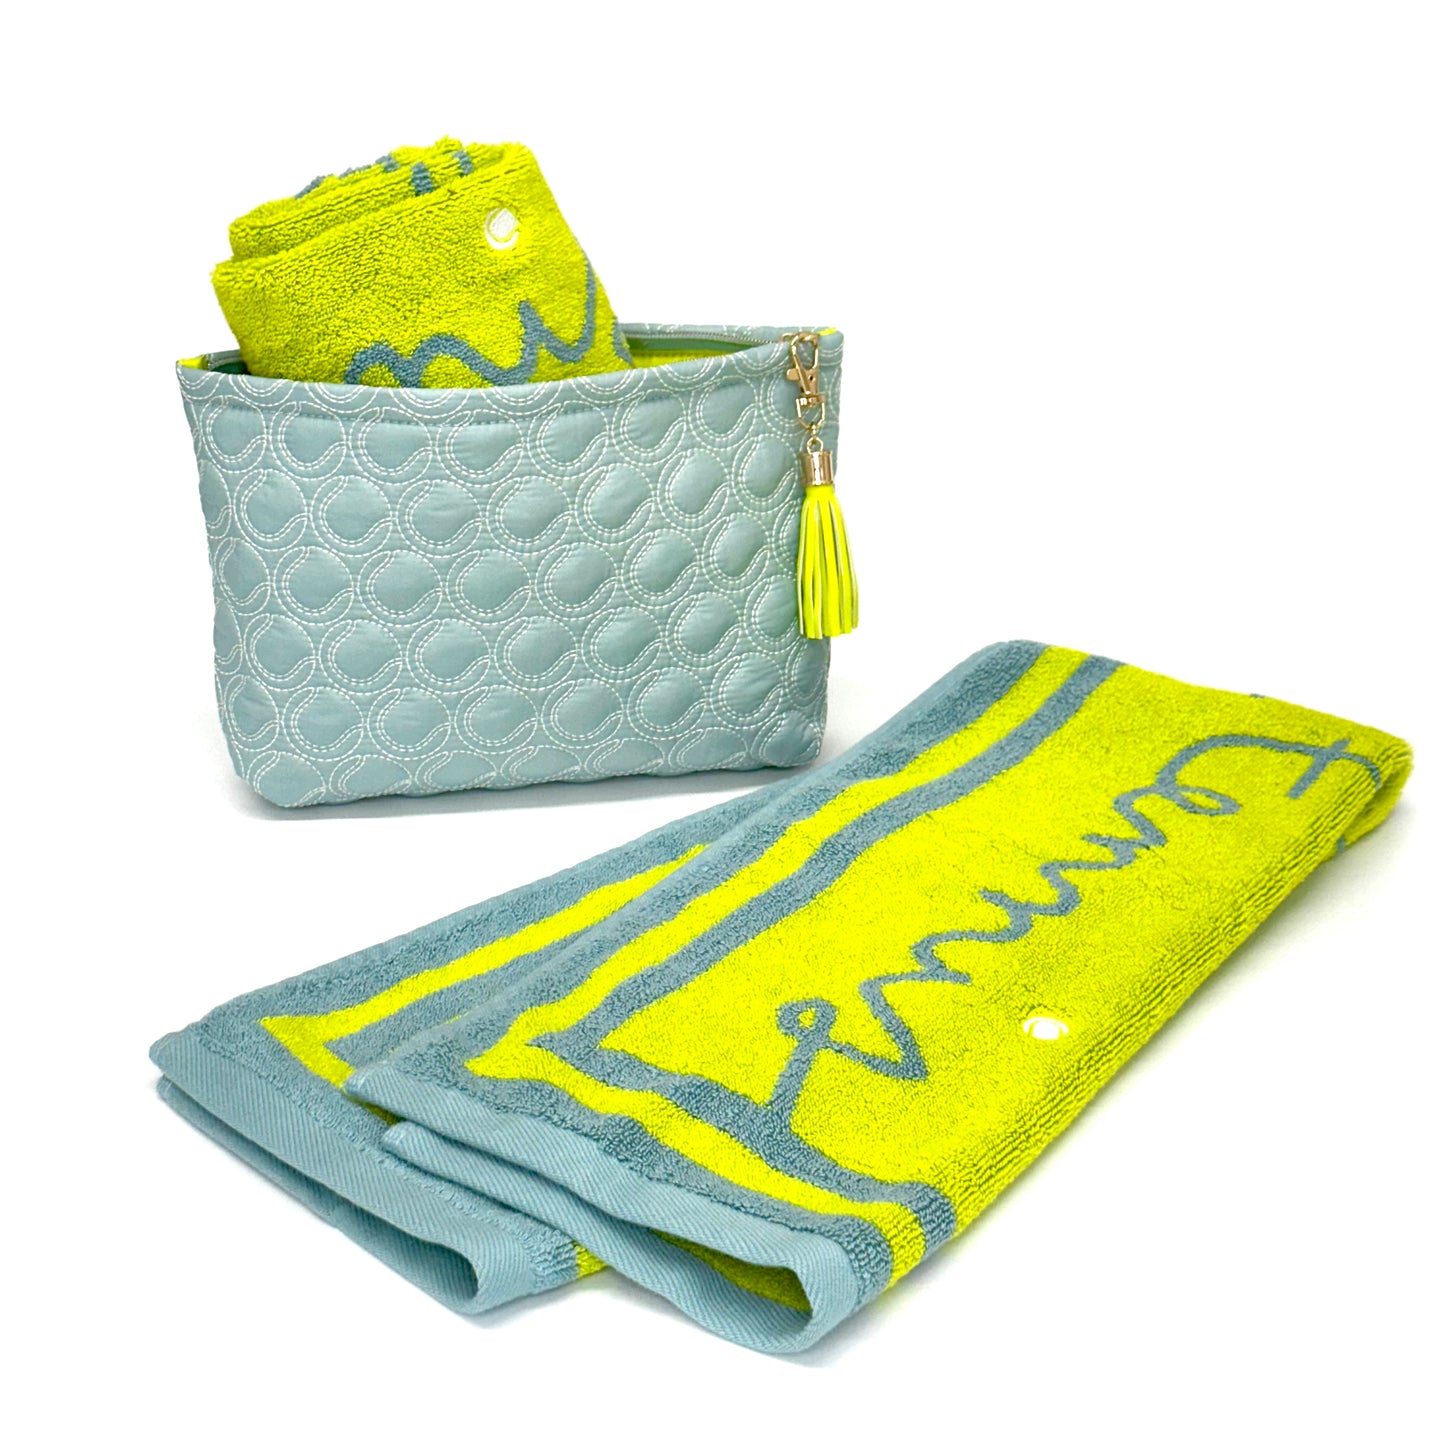 Travel Pouch + Towel Gift Set